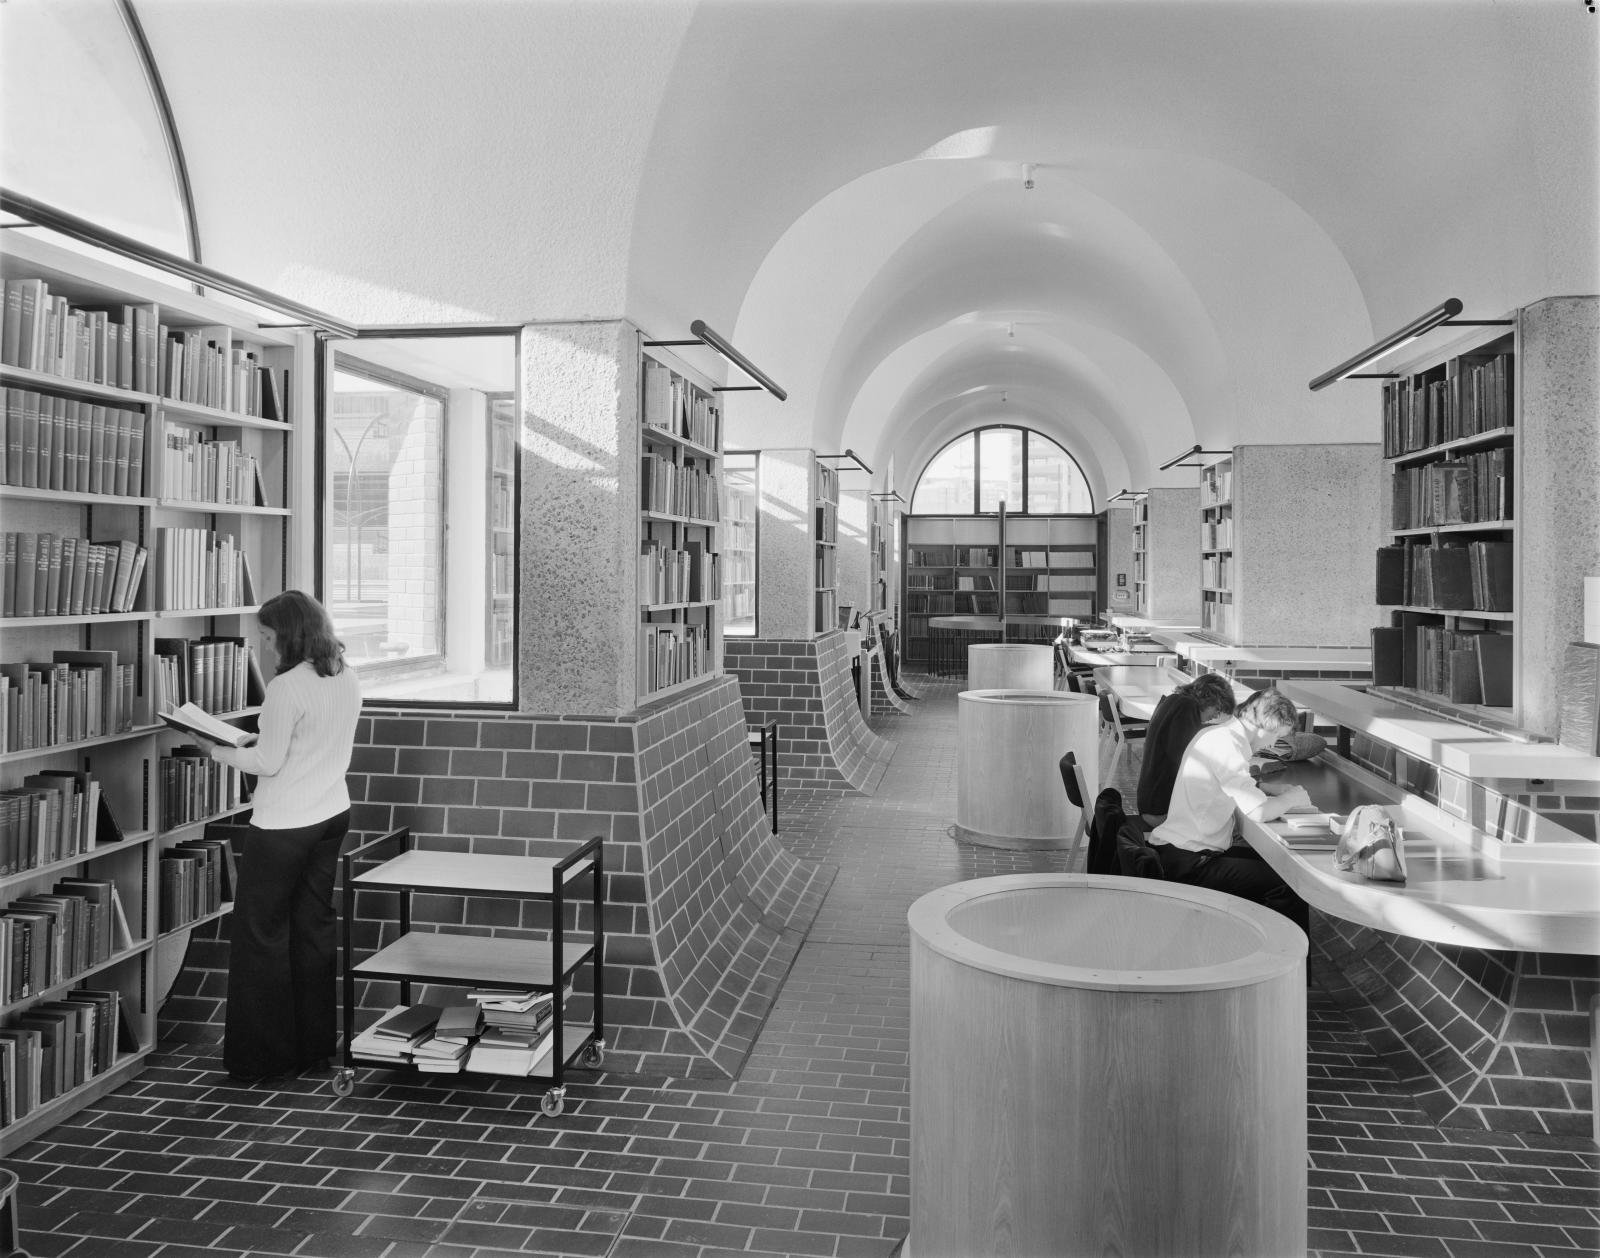 A black and white photo showing the interior of the Guildhall School of Music and Drama Library. The library’s floors and walls are partially covered with bricks, and three people are reading books in the area.